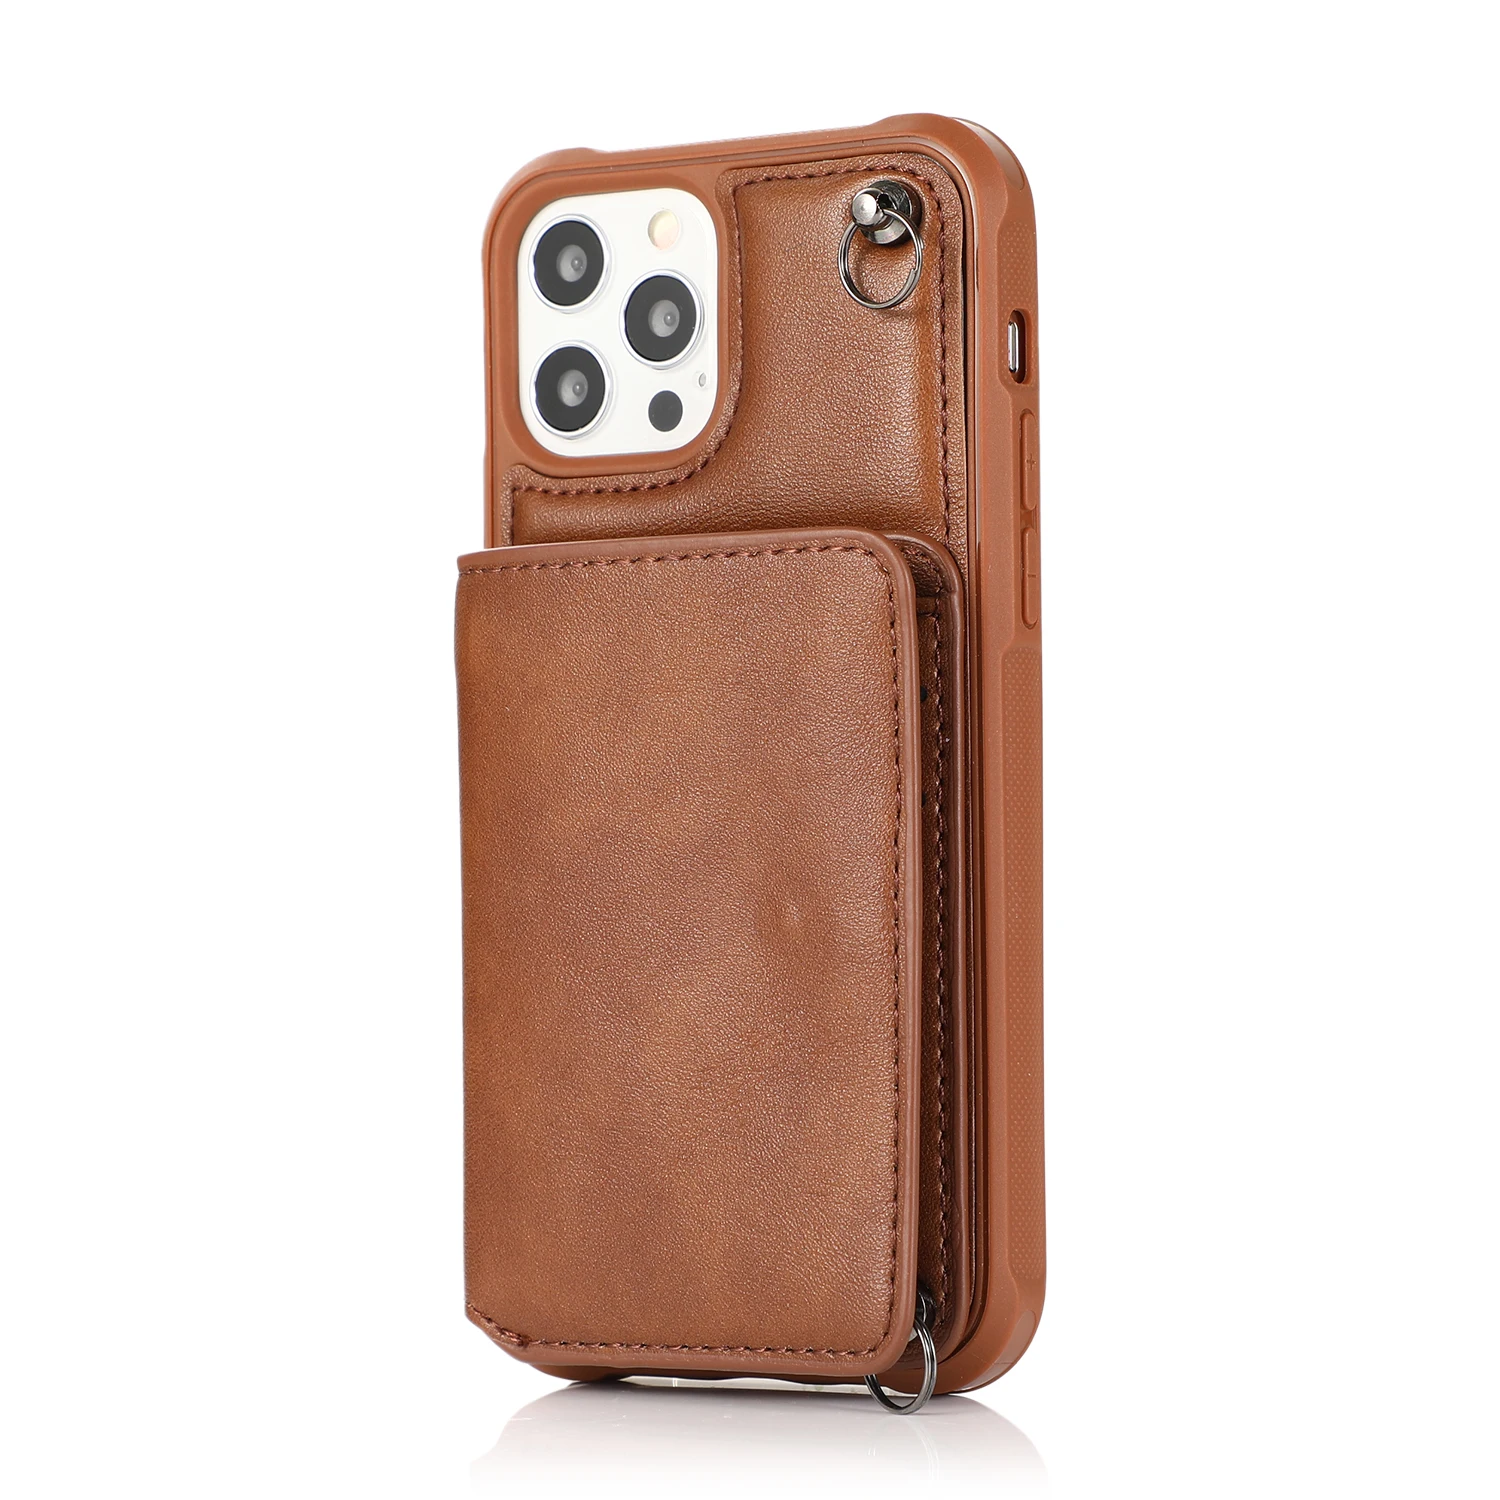 Fashion simple card wallet Crossbody chain bag strap leather case for iPhone 12 11 Pro max case 7 8 plus XS MAX 12mini X XR CAPA iphone 8 plus phone case